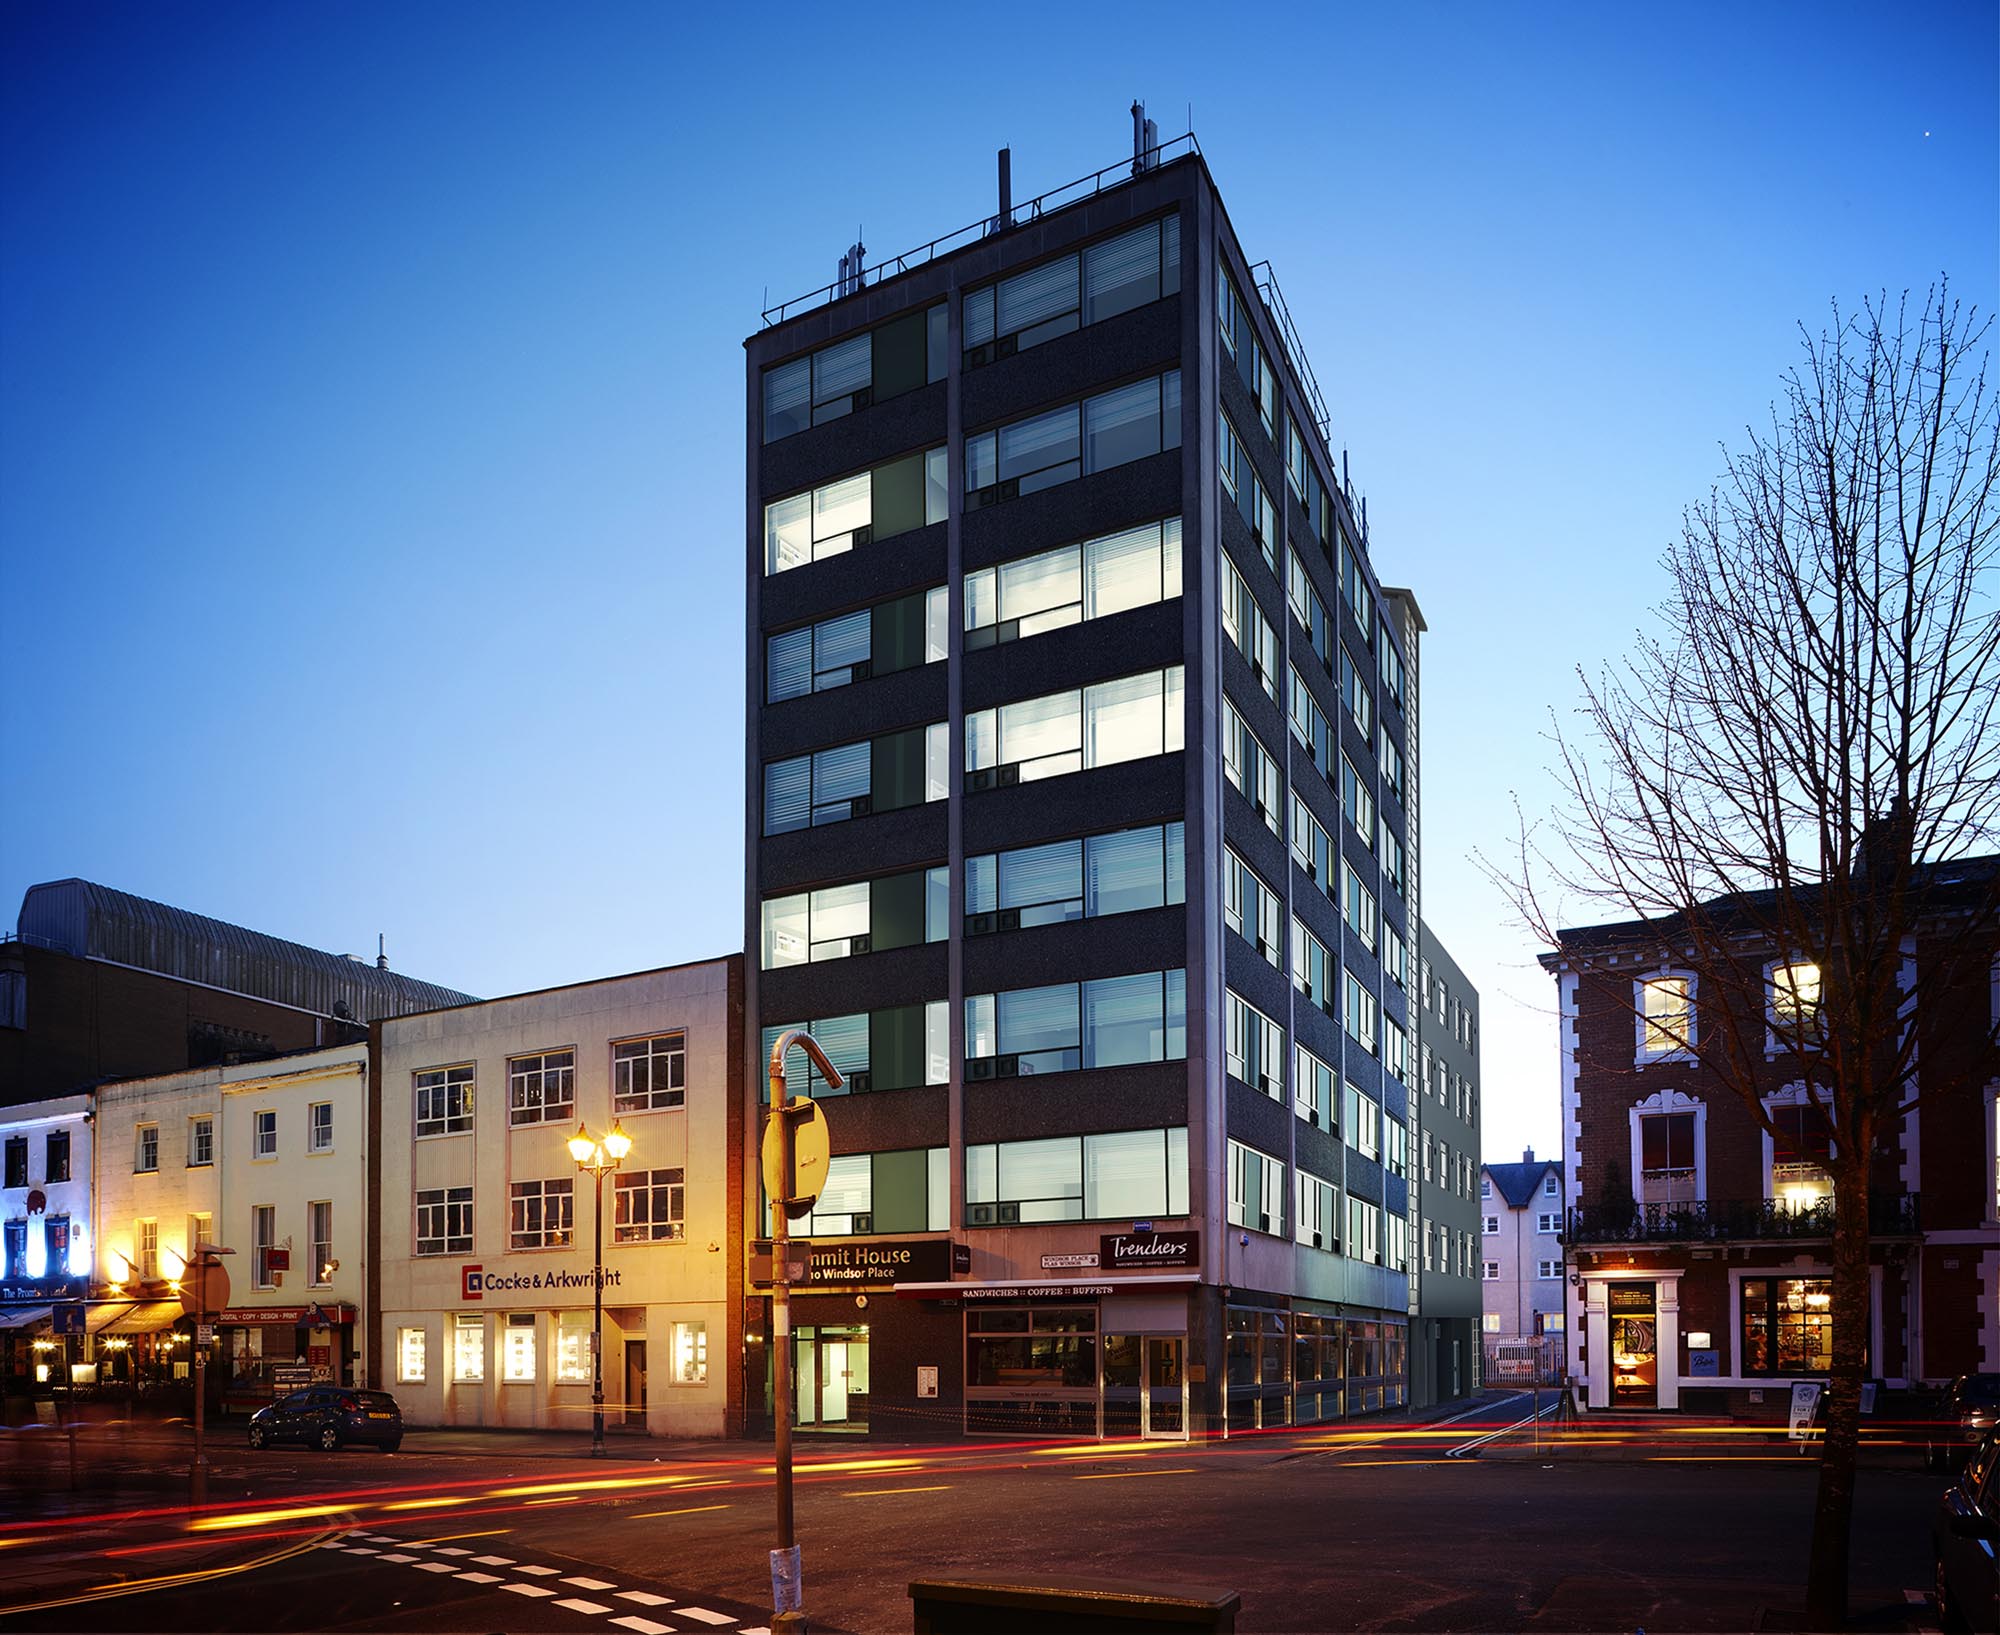 Cardiff Summit house: Conversion into student accommodation